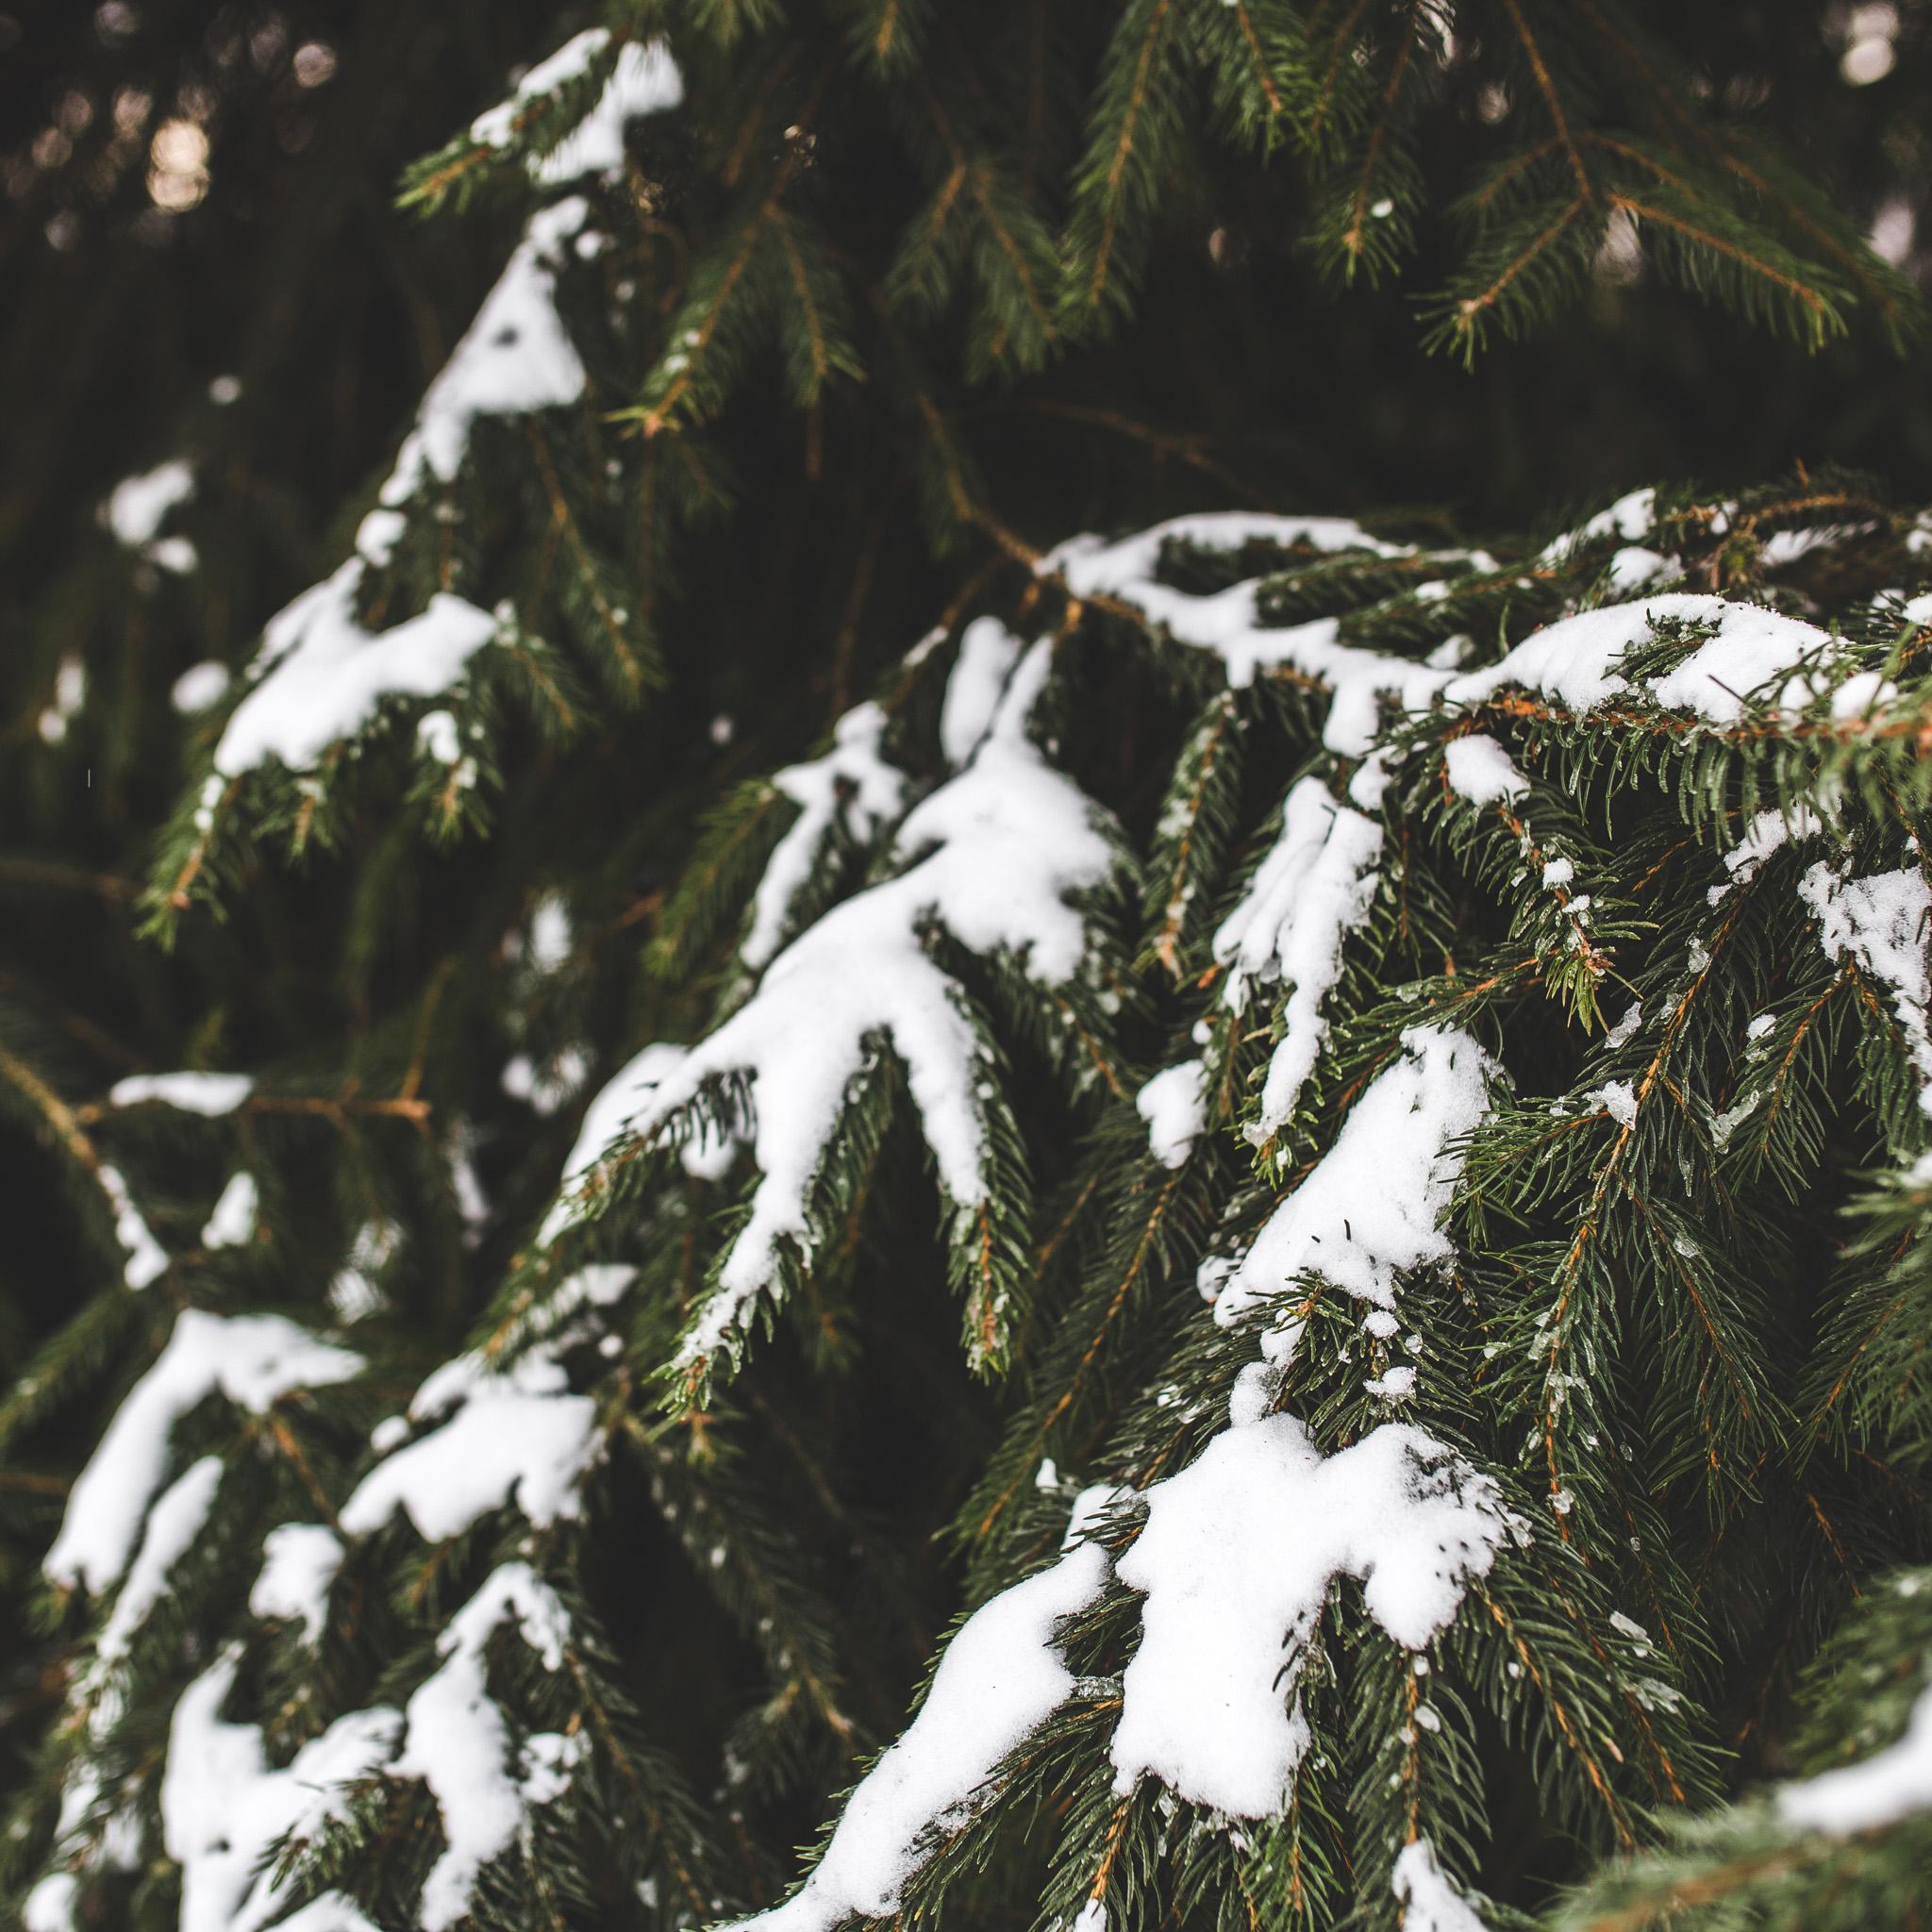 Green Spruce Tree Covered in Snow iPad Wallpaper